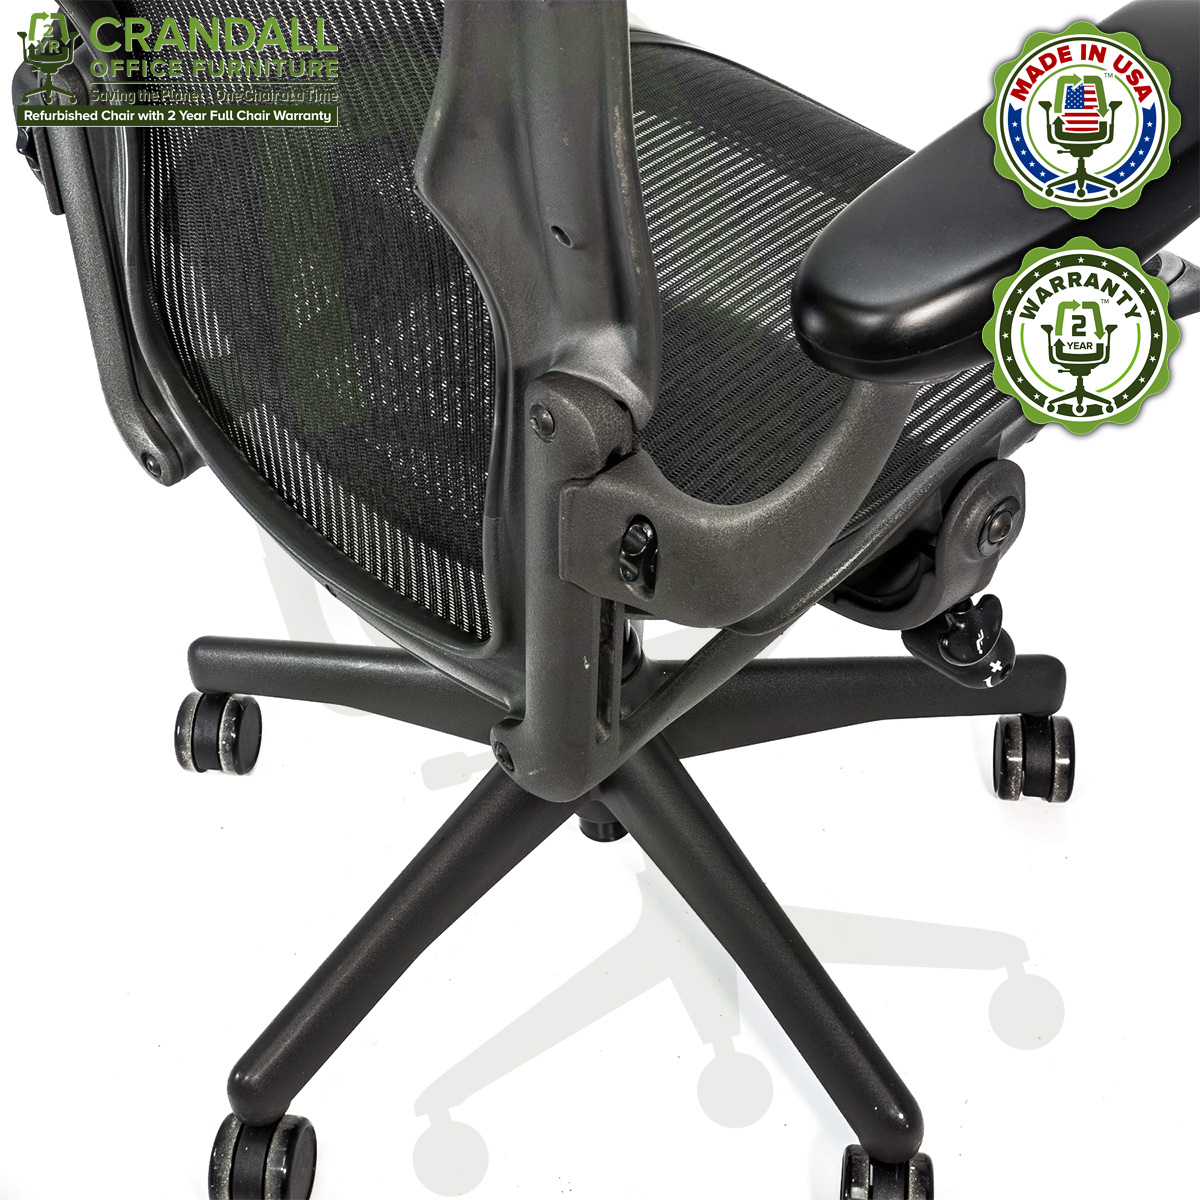 Crandall Office Furniture Refurbished Herman Miller Aeron Chair with 2 Year Warranty - 07